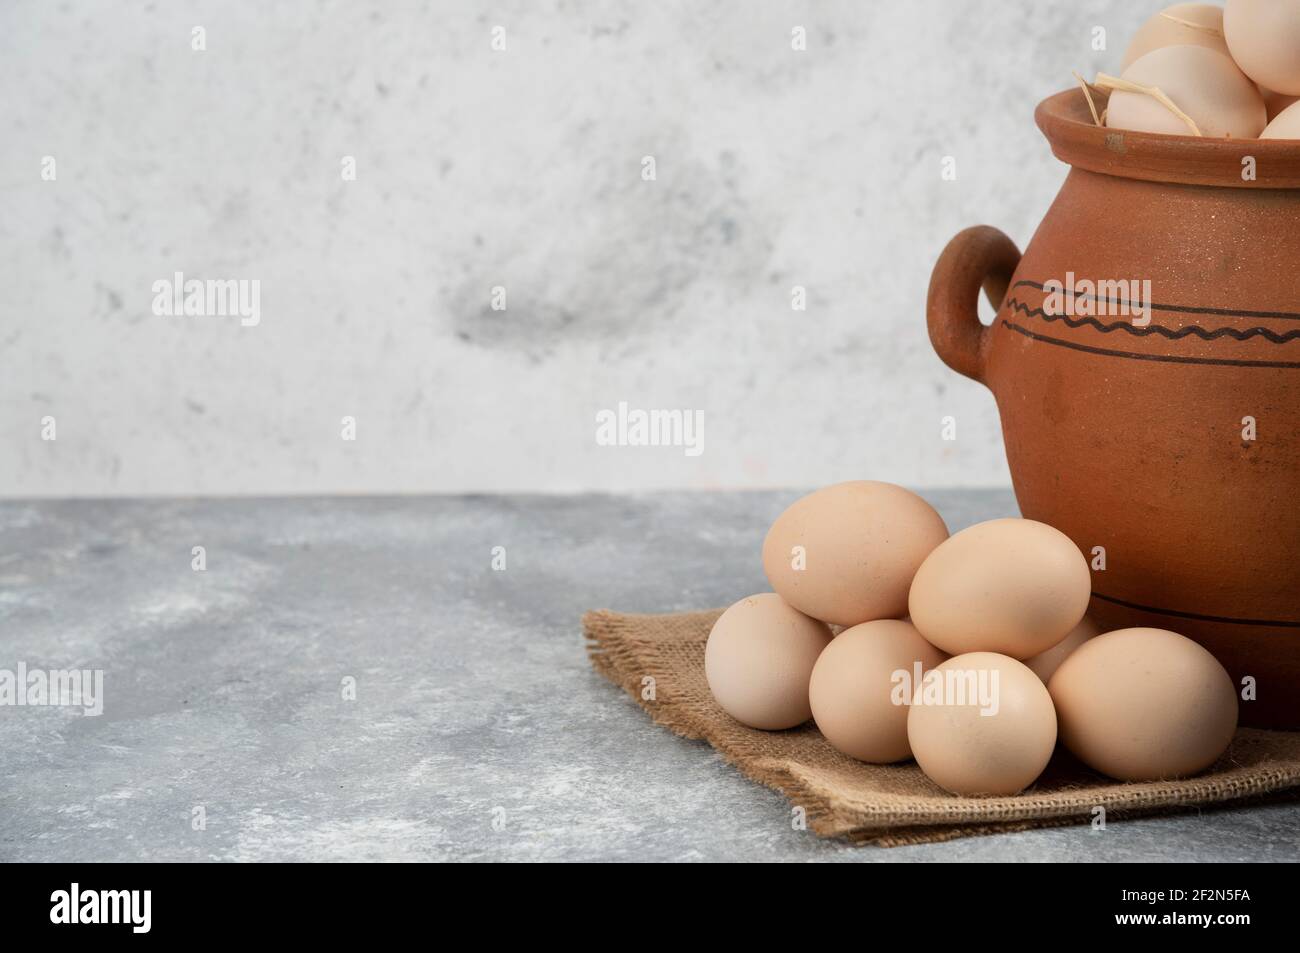 Clay pot full of raw chicken eggs on marble background Stock Photo